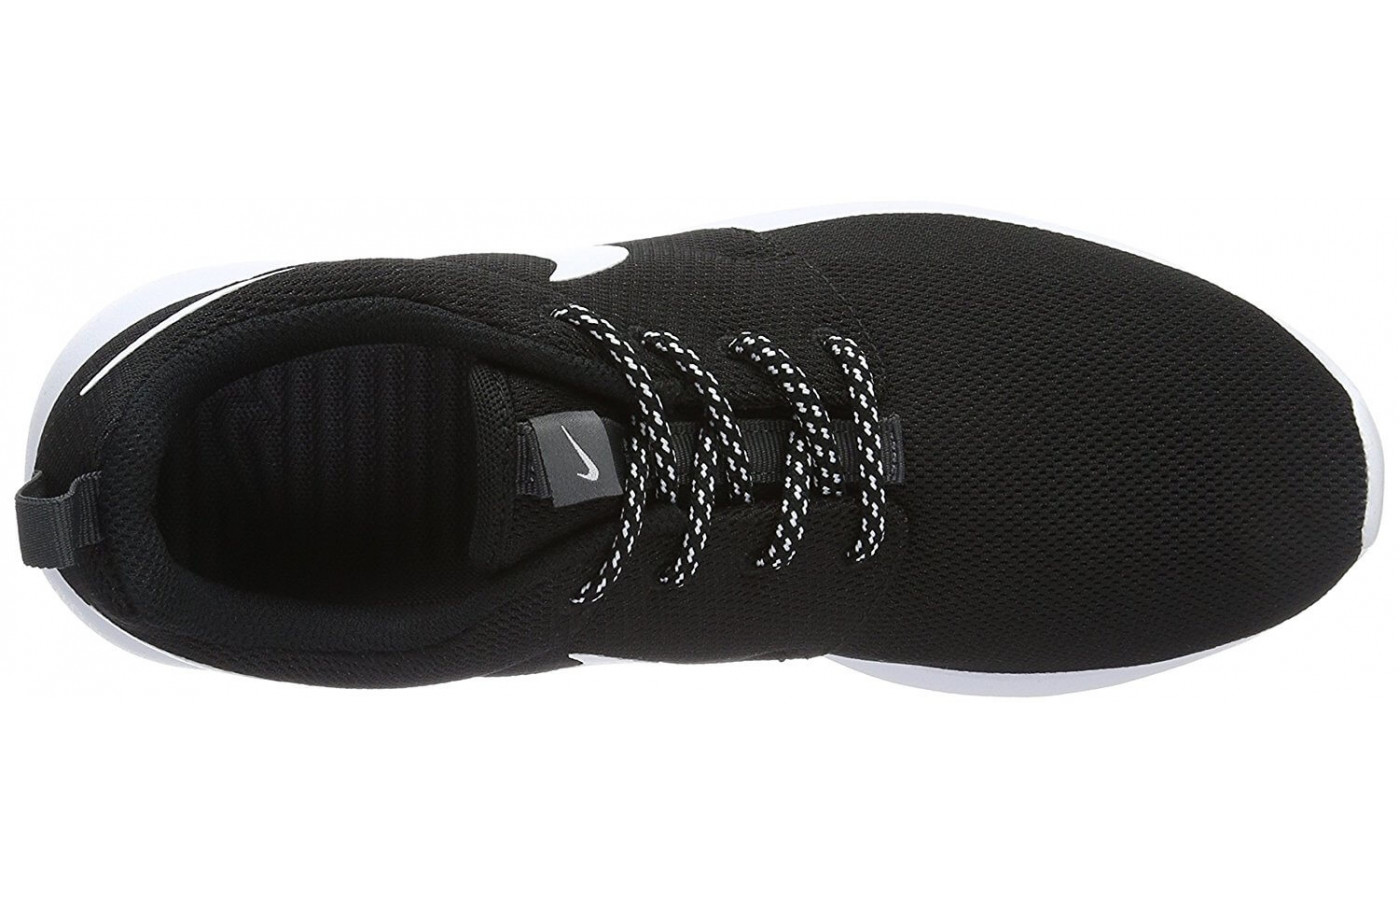 The top portion of the Nike Roshe One.